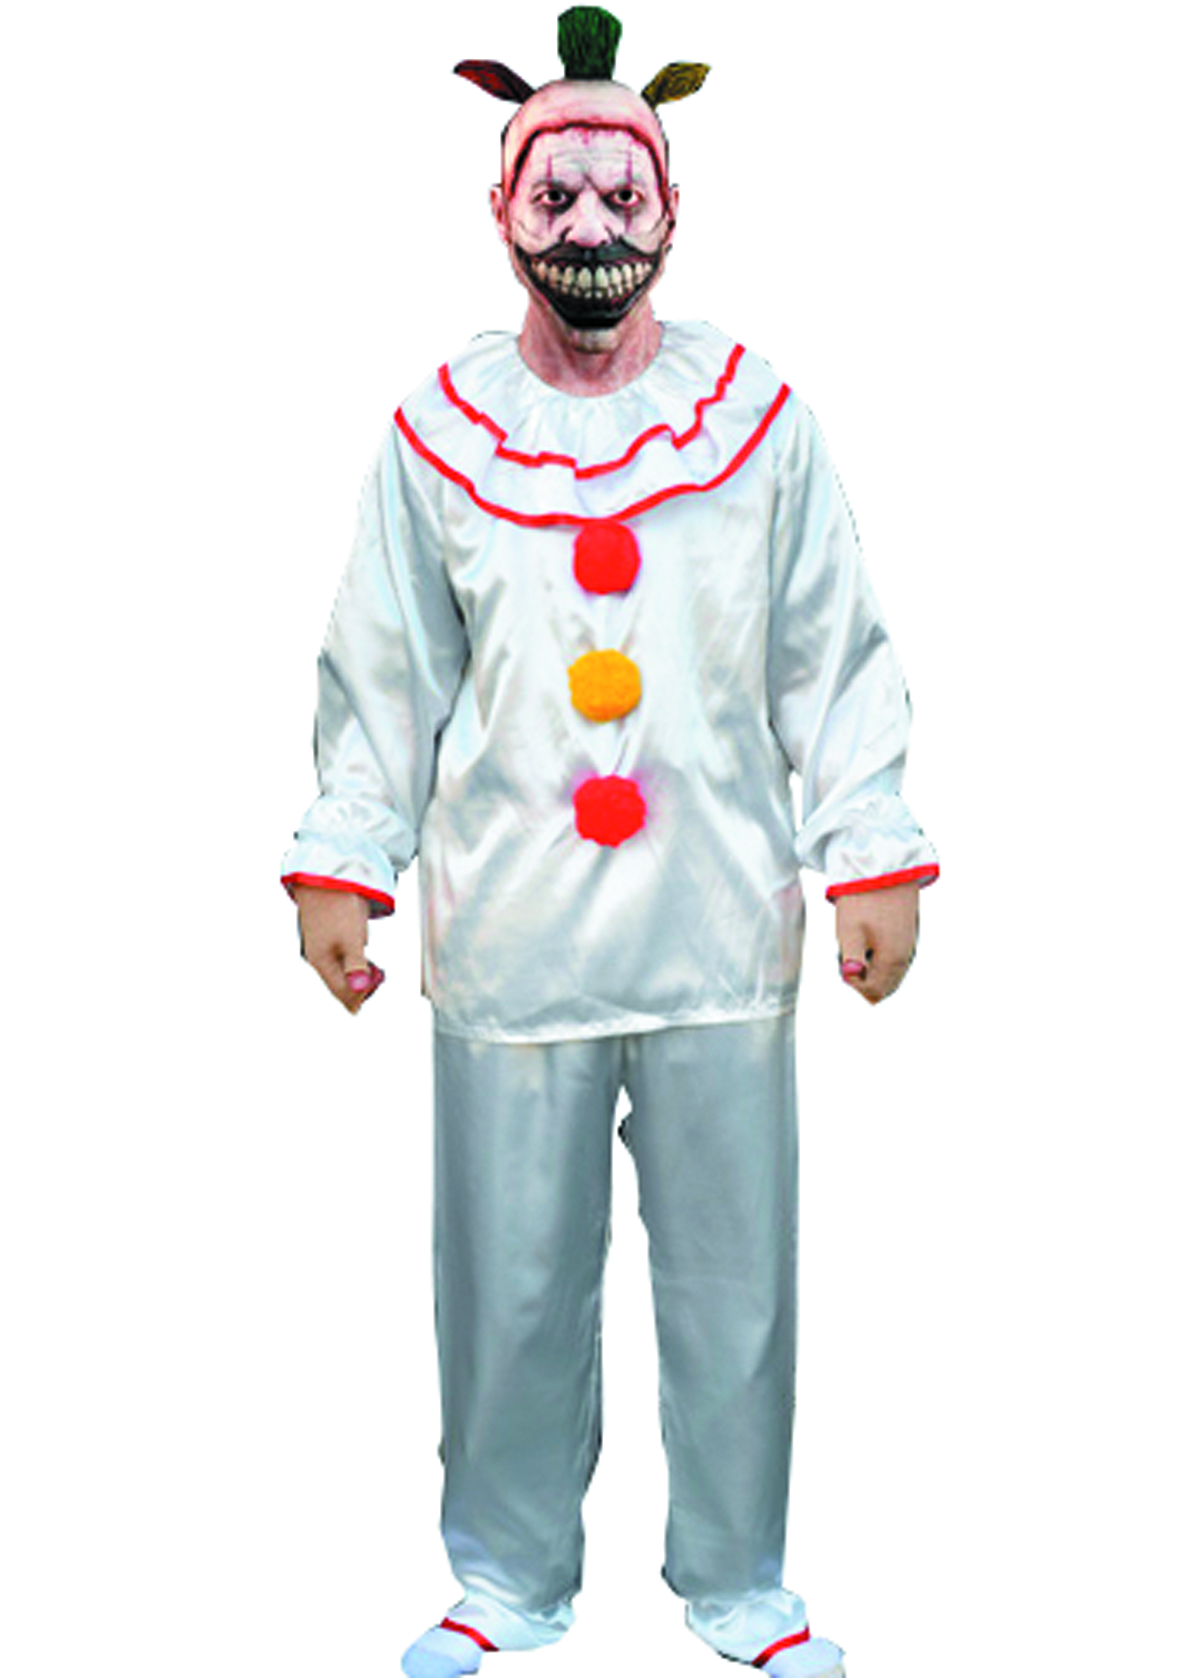 AUG158399 - AMERICAN HORROR STORY TWISTY THE CLOWN COSTUME - Previews World